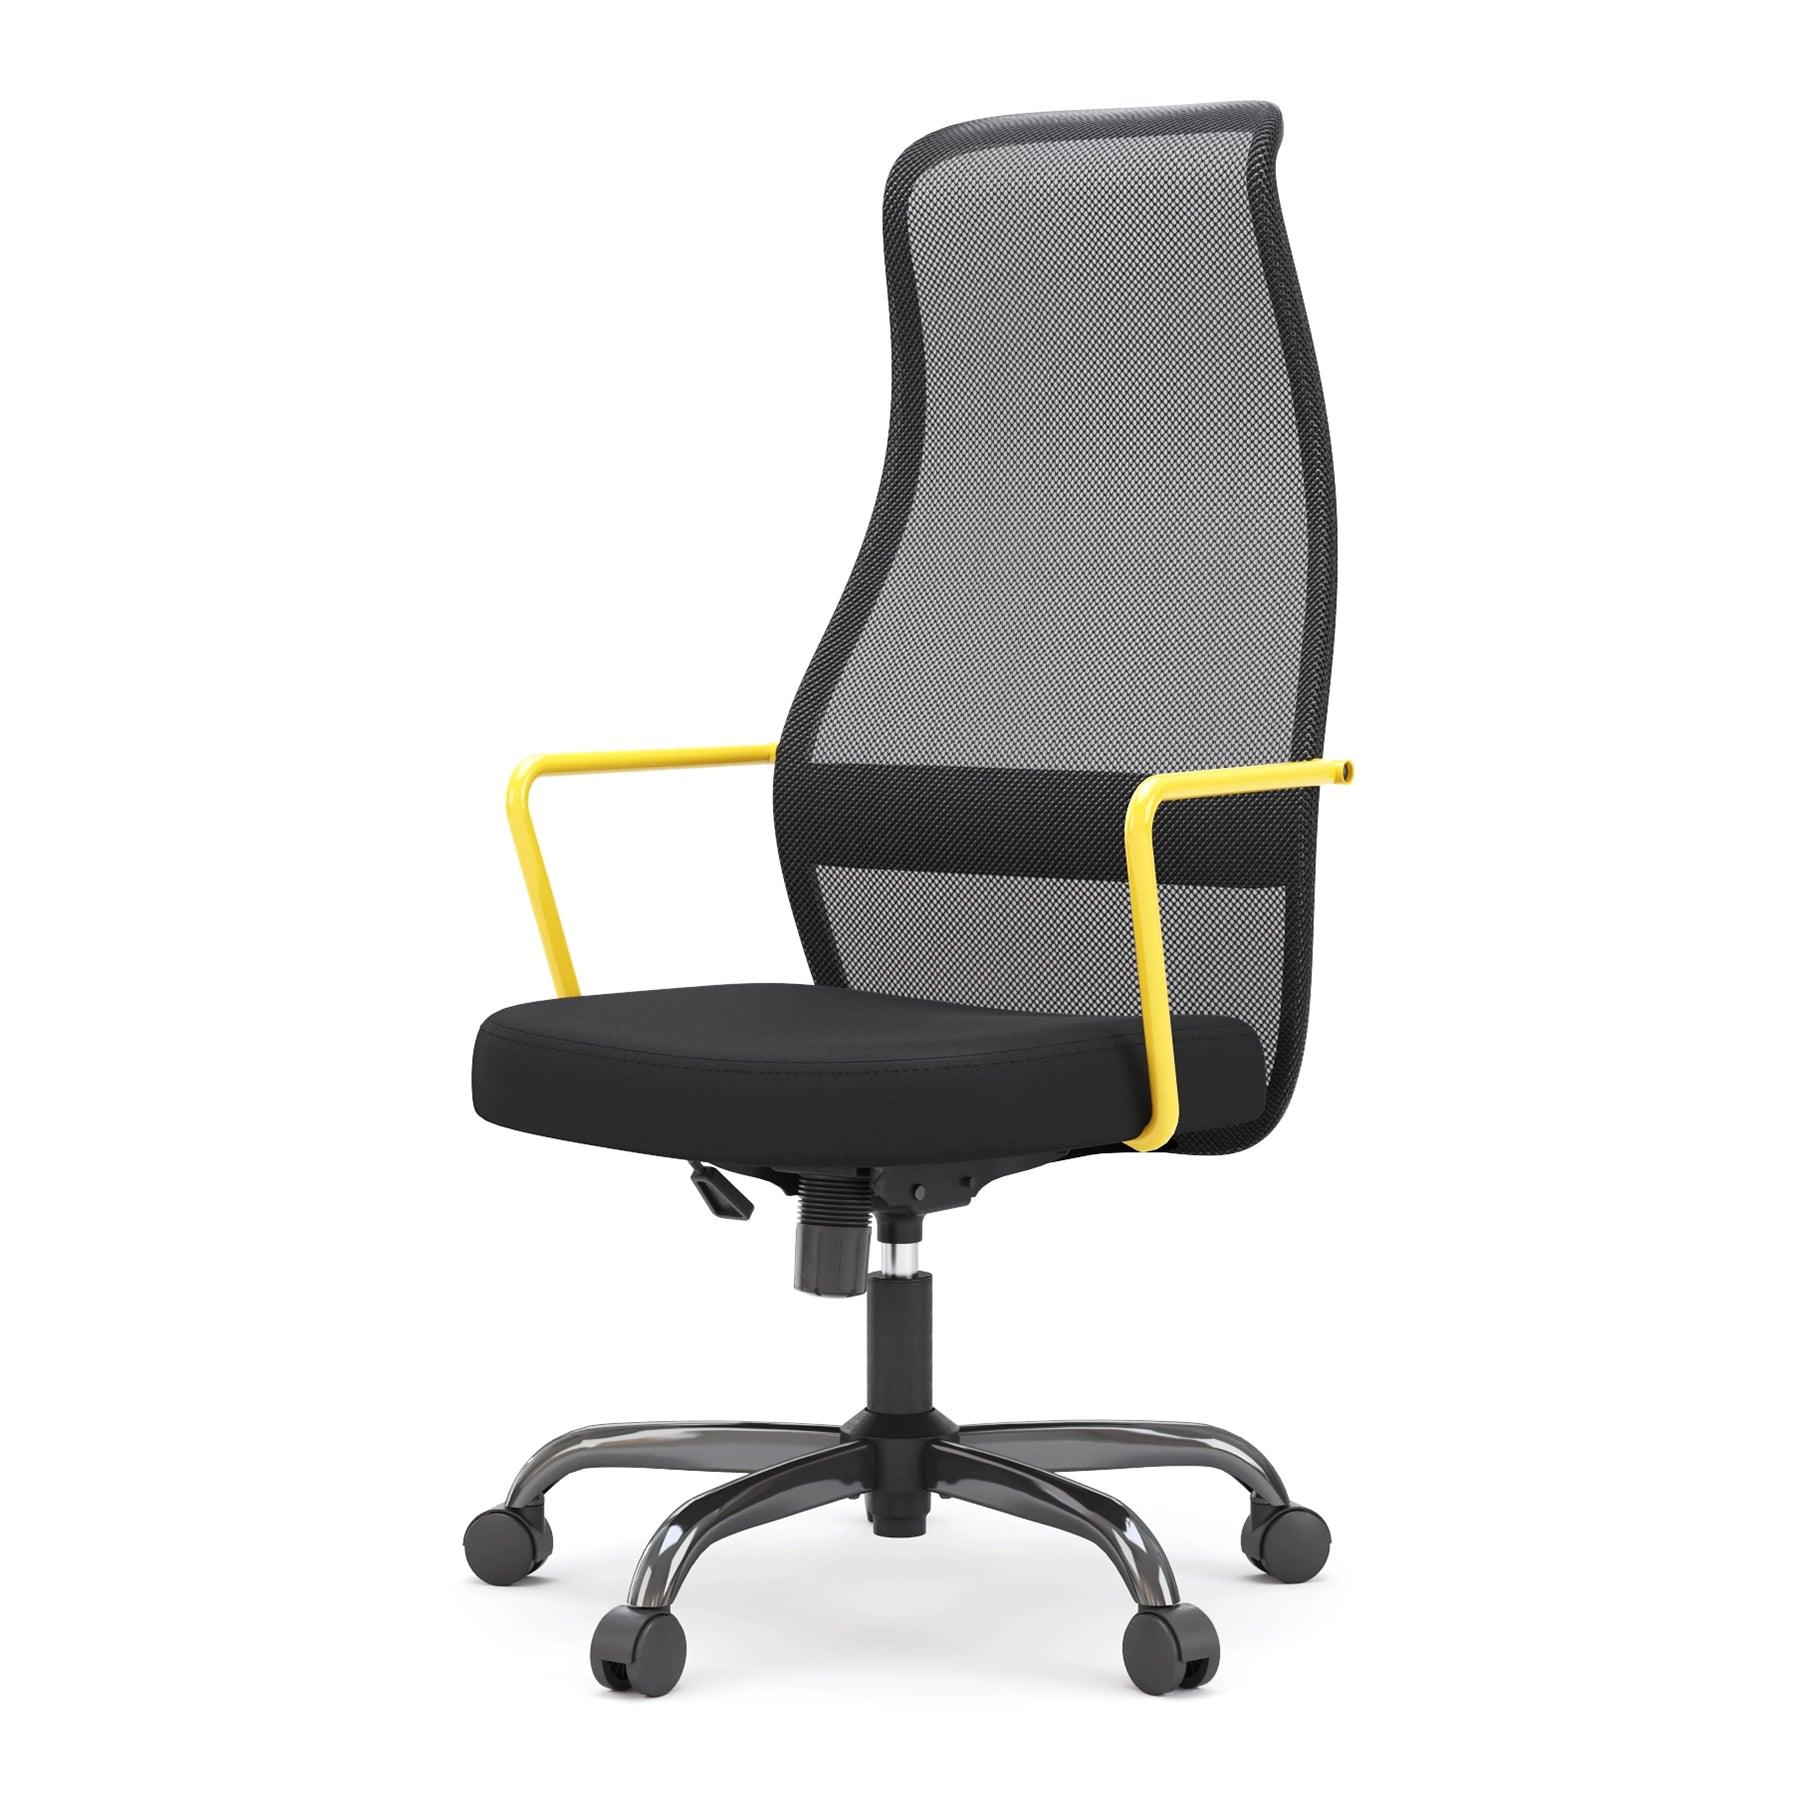 Sihoo M101C High-Back Ergonomic Office Chair - Comfort and Style